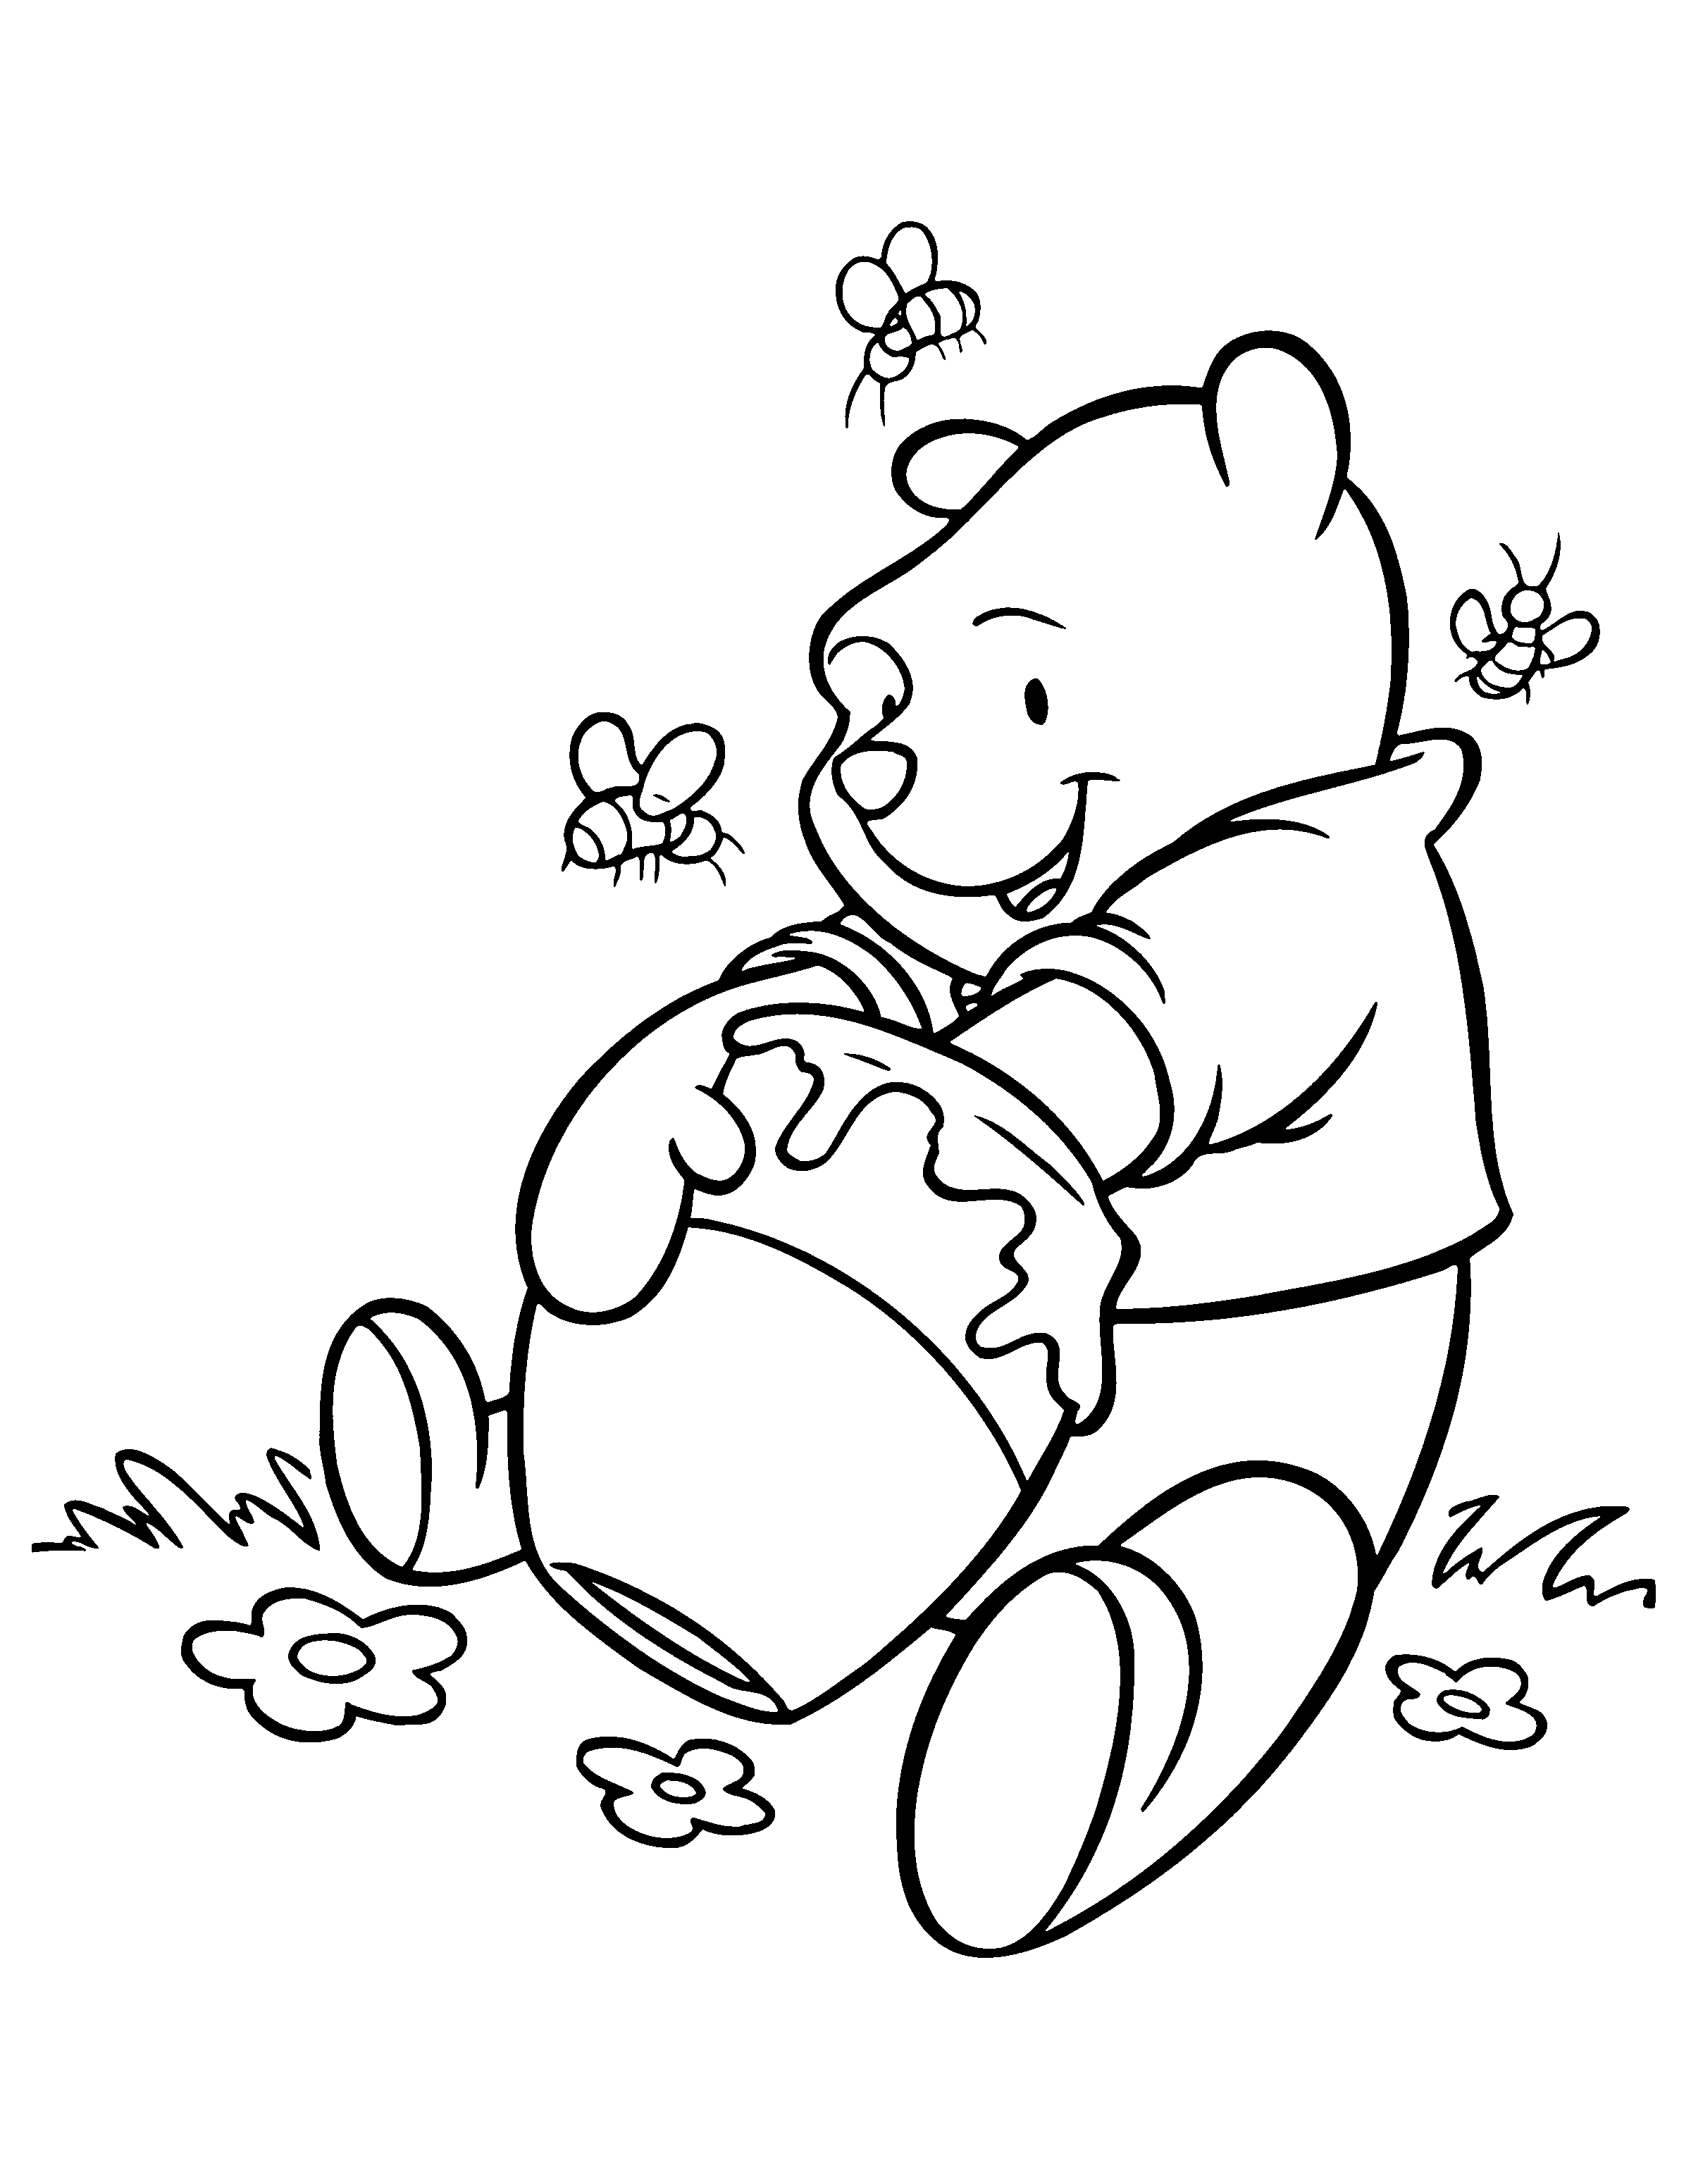 Coloring Page - Winnie the pooh coloring pages 114